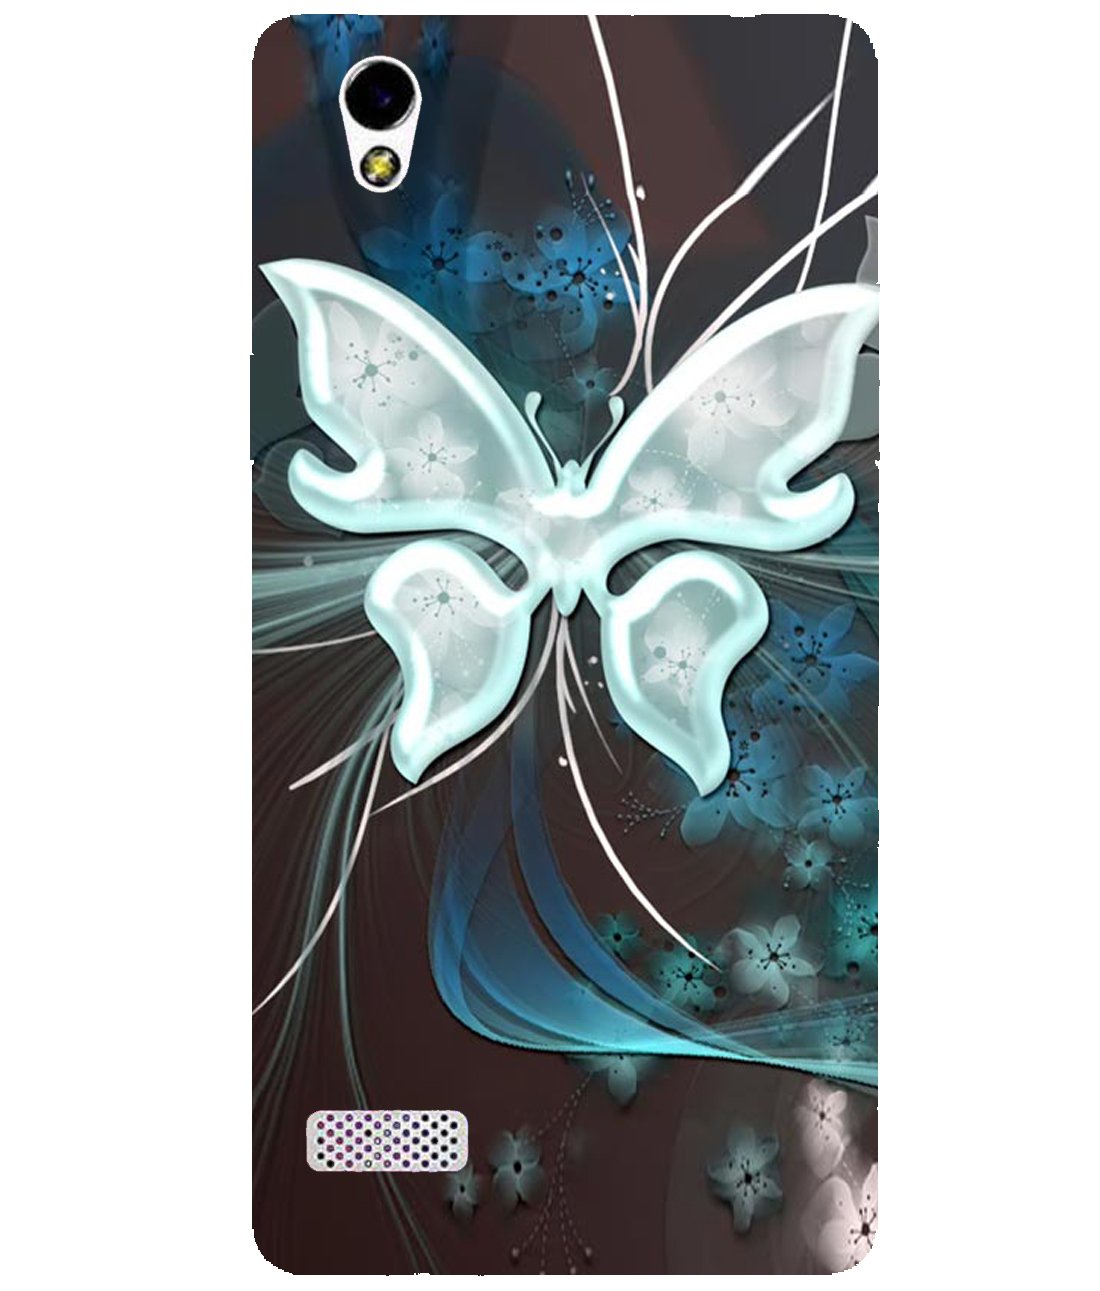 3d wallpaper for mobile,butterfly,aqua,turquoise,teal,insect